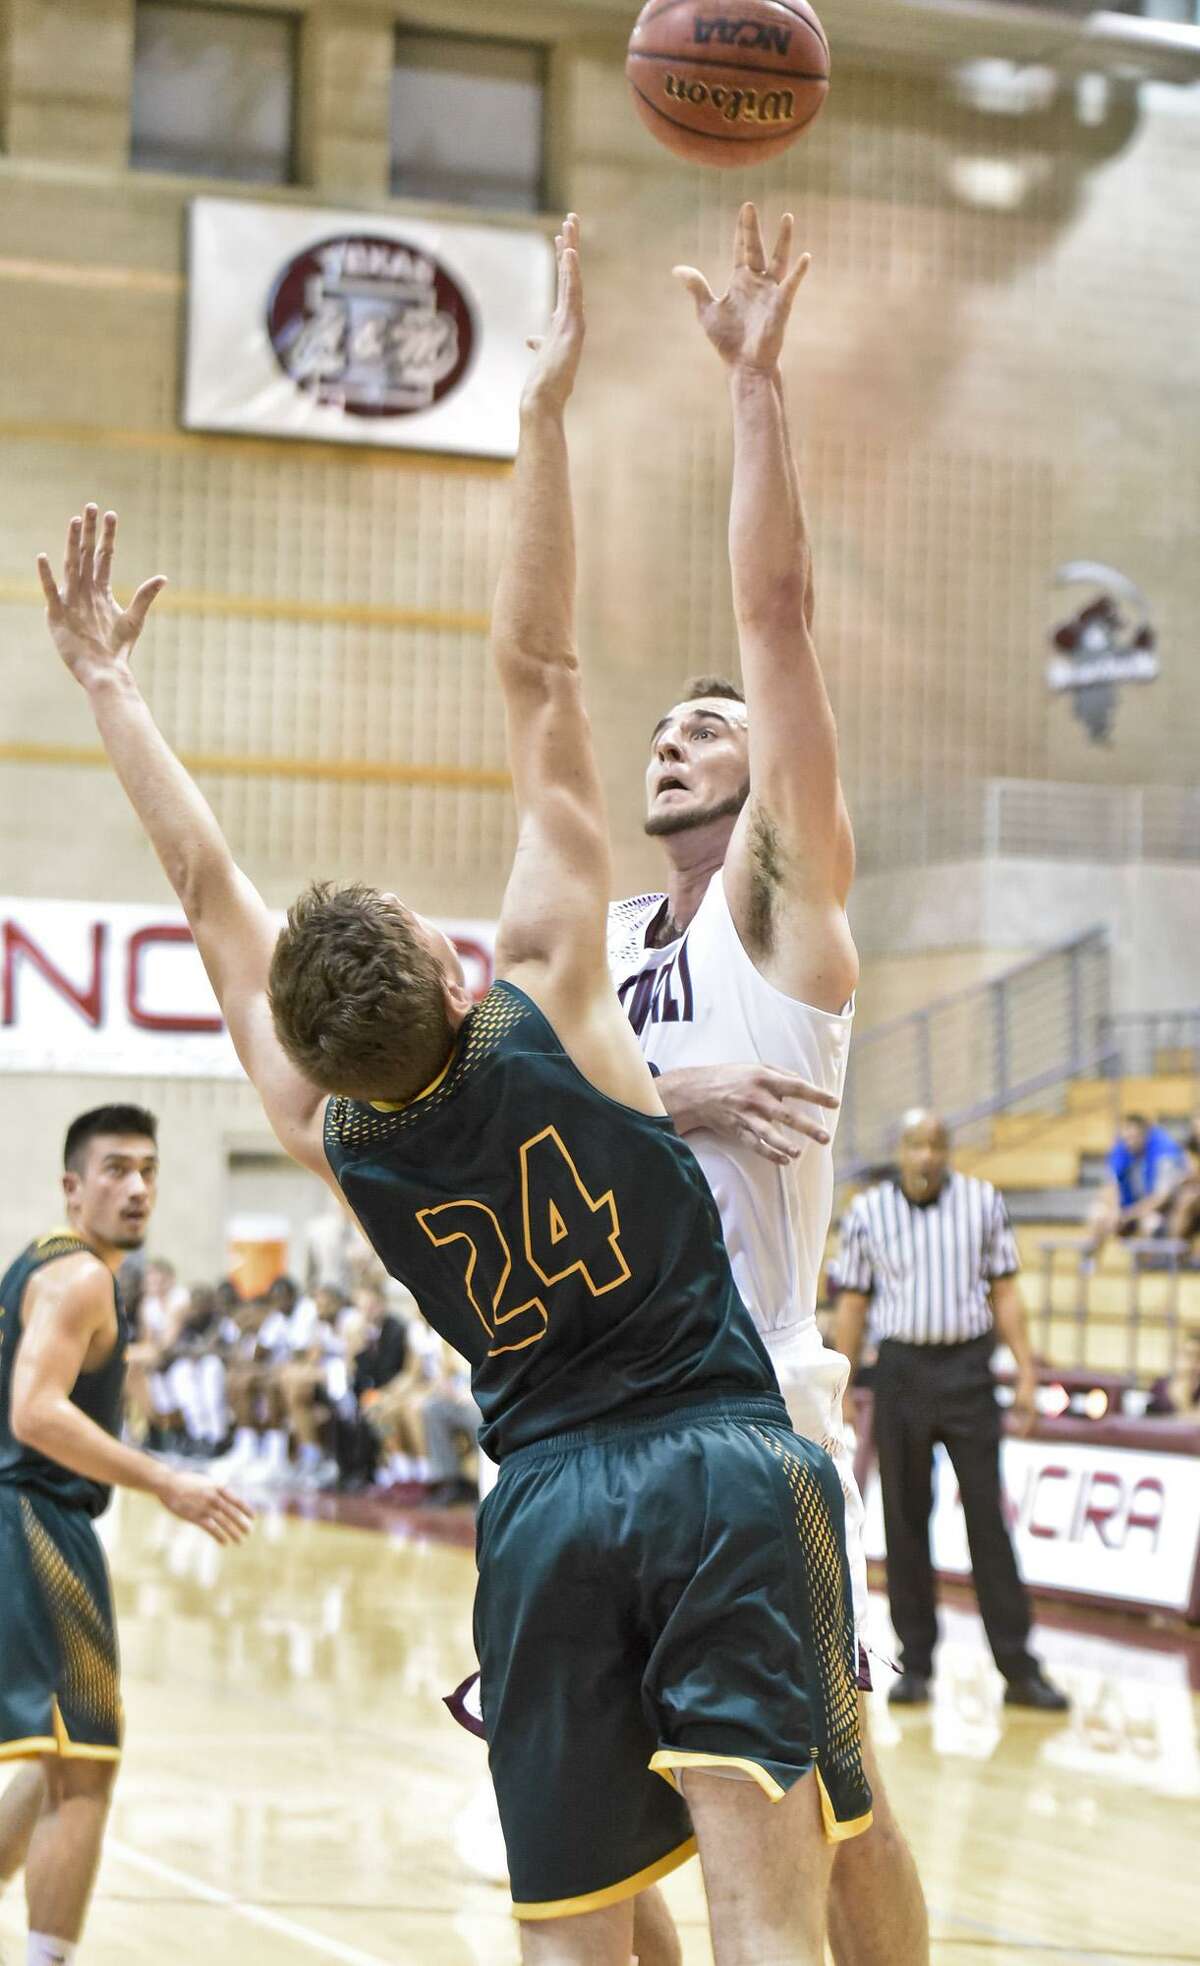 Jordan VanDeKop has led TAMIU in scoring with 16 points in each of the past two games. He is one of three players averaging double figures scoring 11 per game.